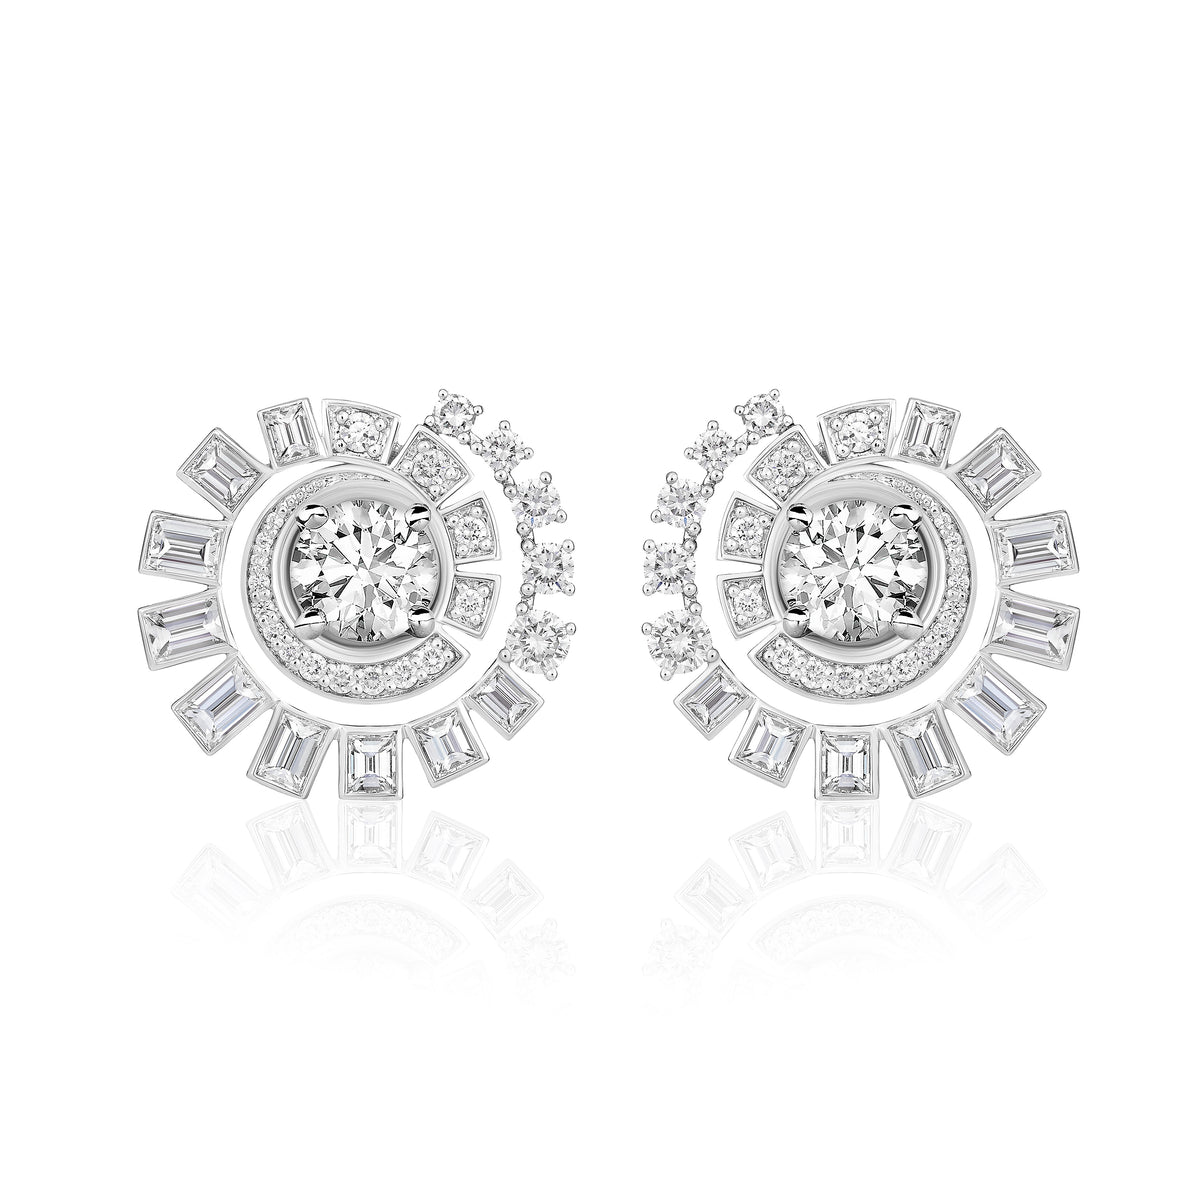 Celestial Swirl Ear Jackets in White Gold with Mixed Shape Diamonds